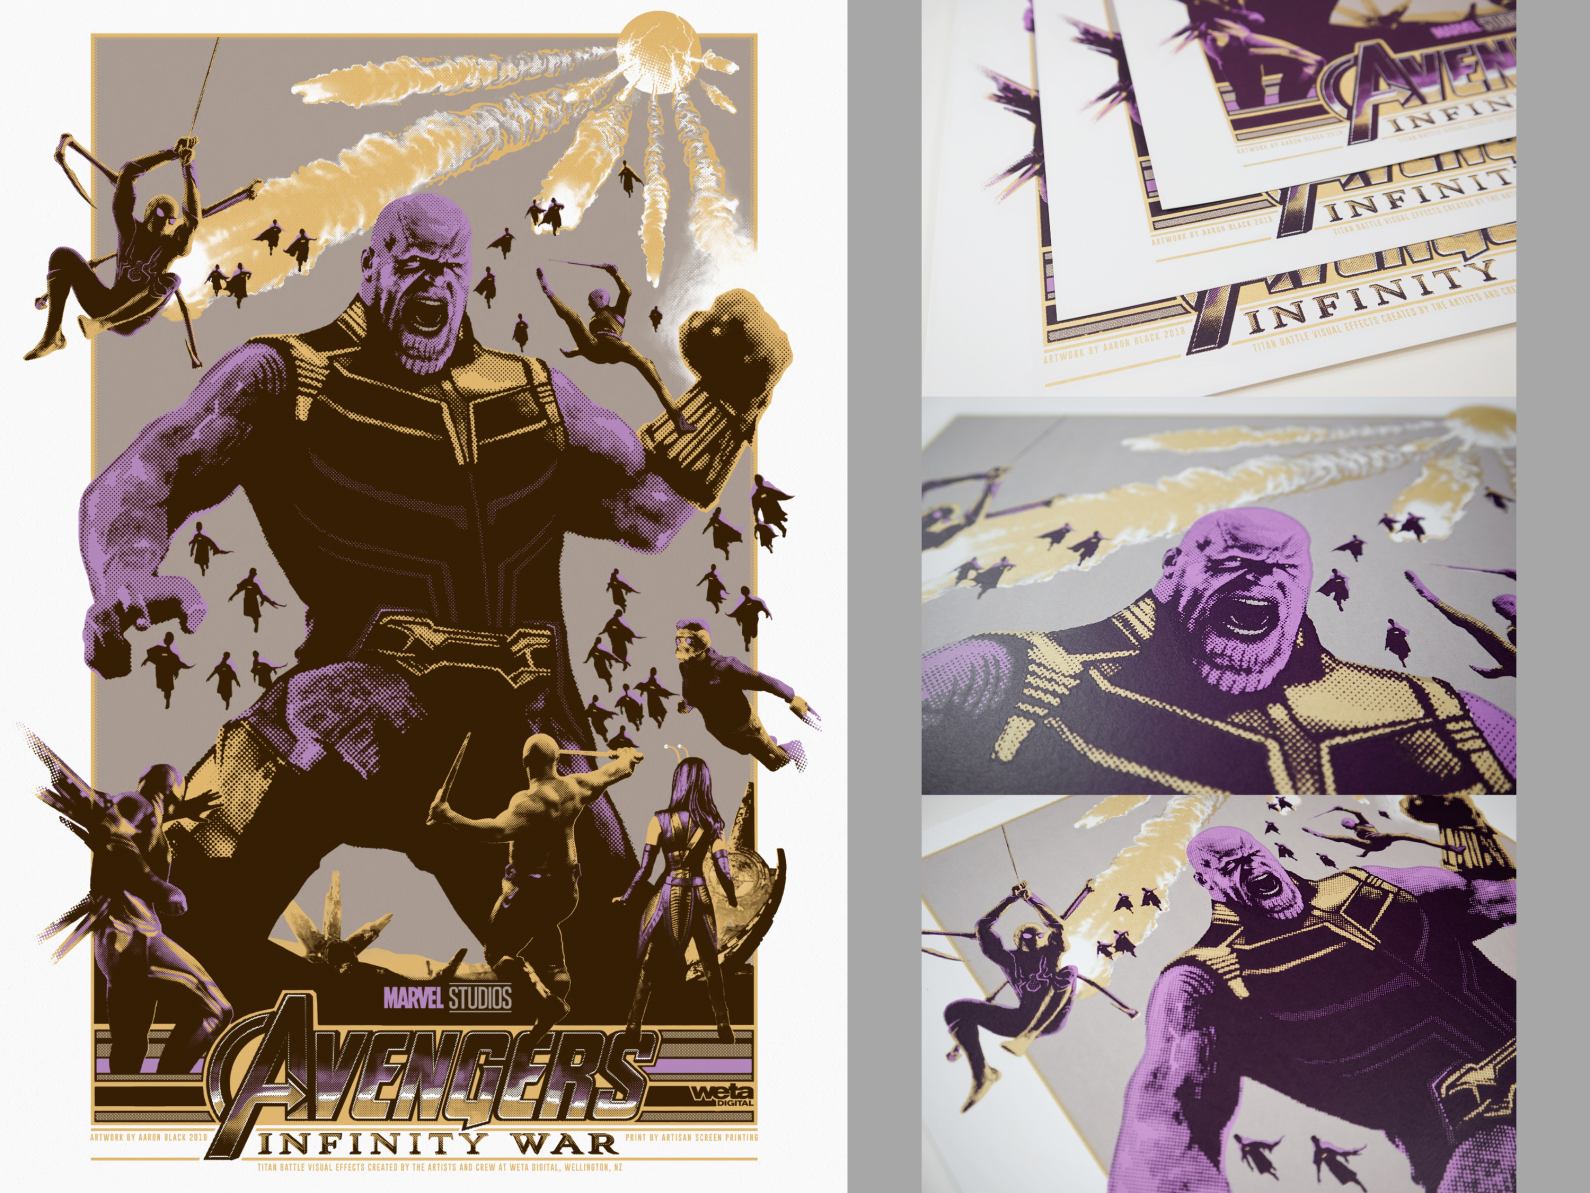 Avengers Infinity War Poster by Aaron Black on Dribbble